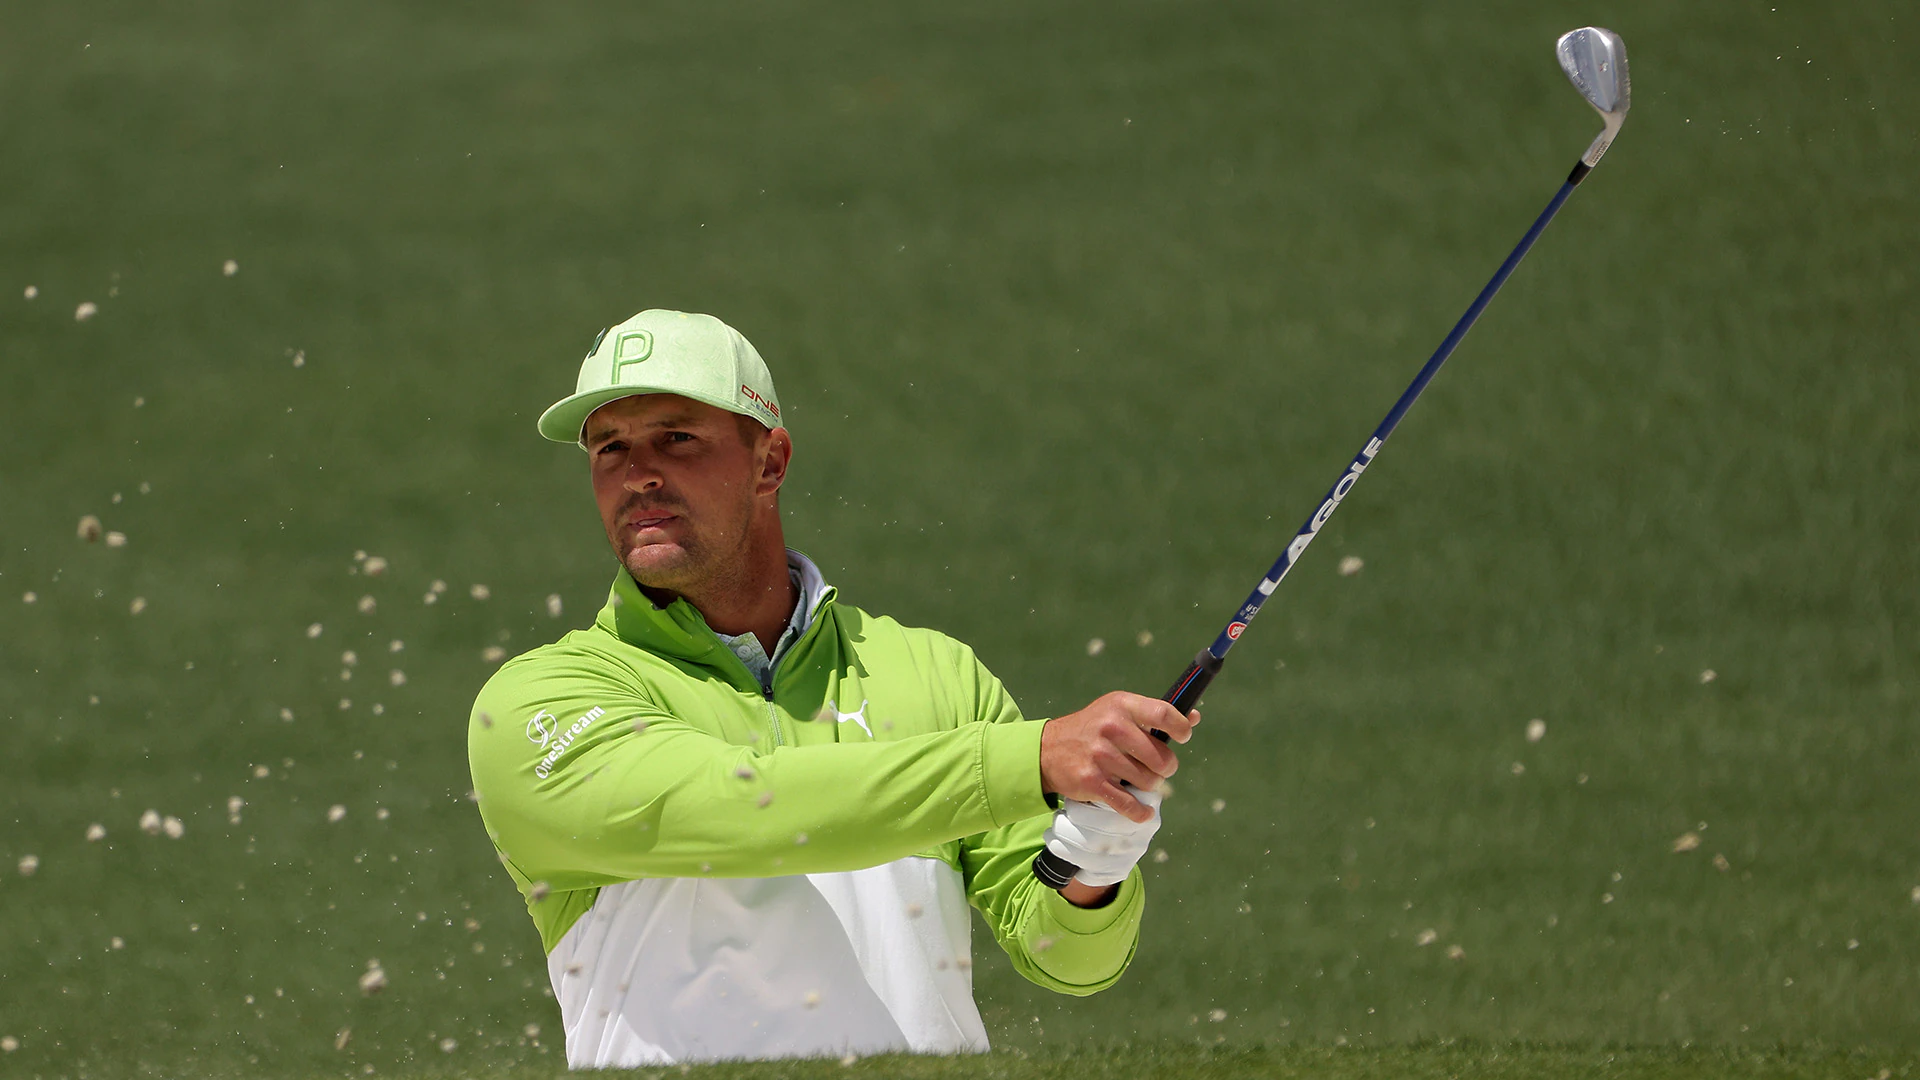 Bryson DeChambeau out of cast, starting to grip club